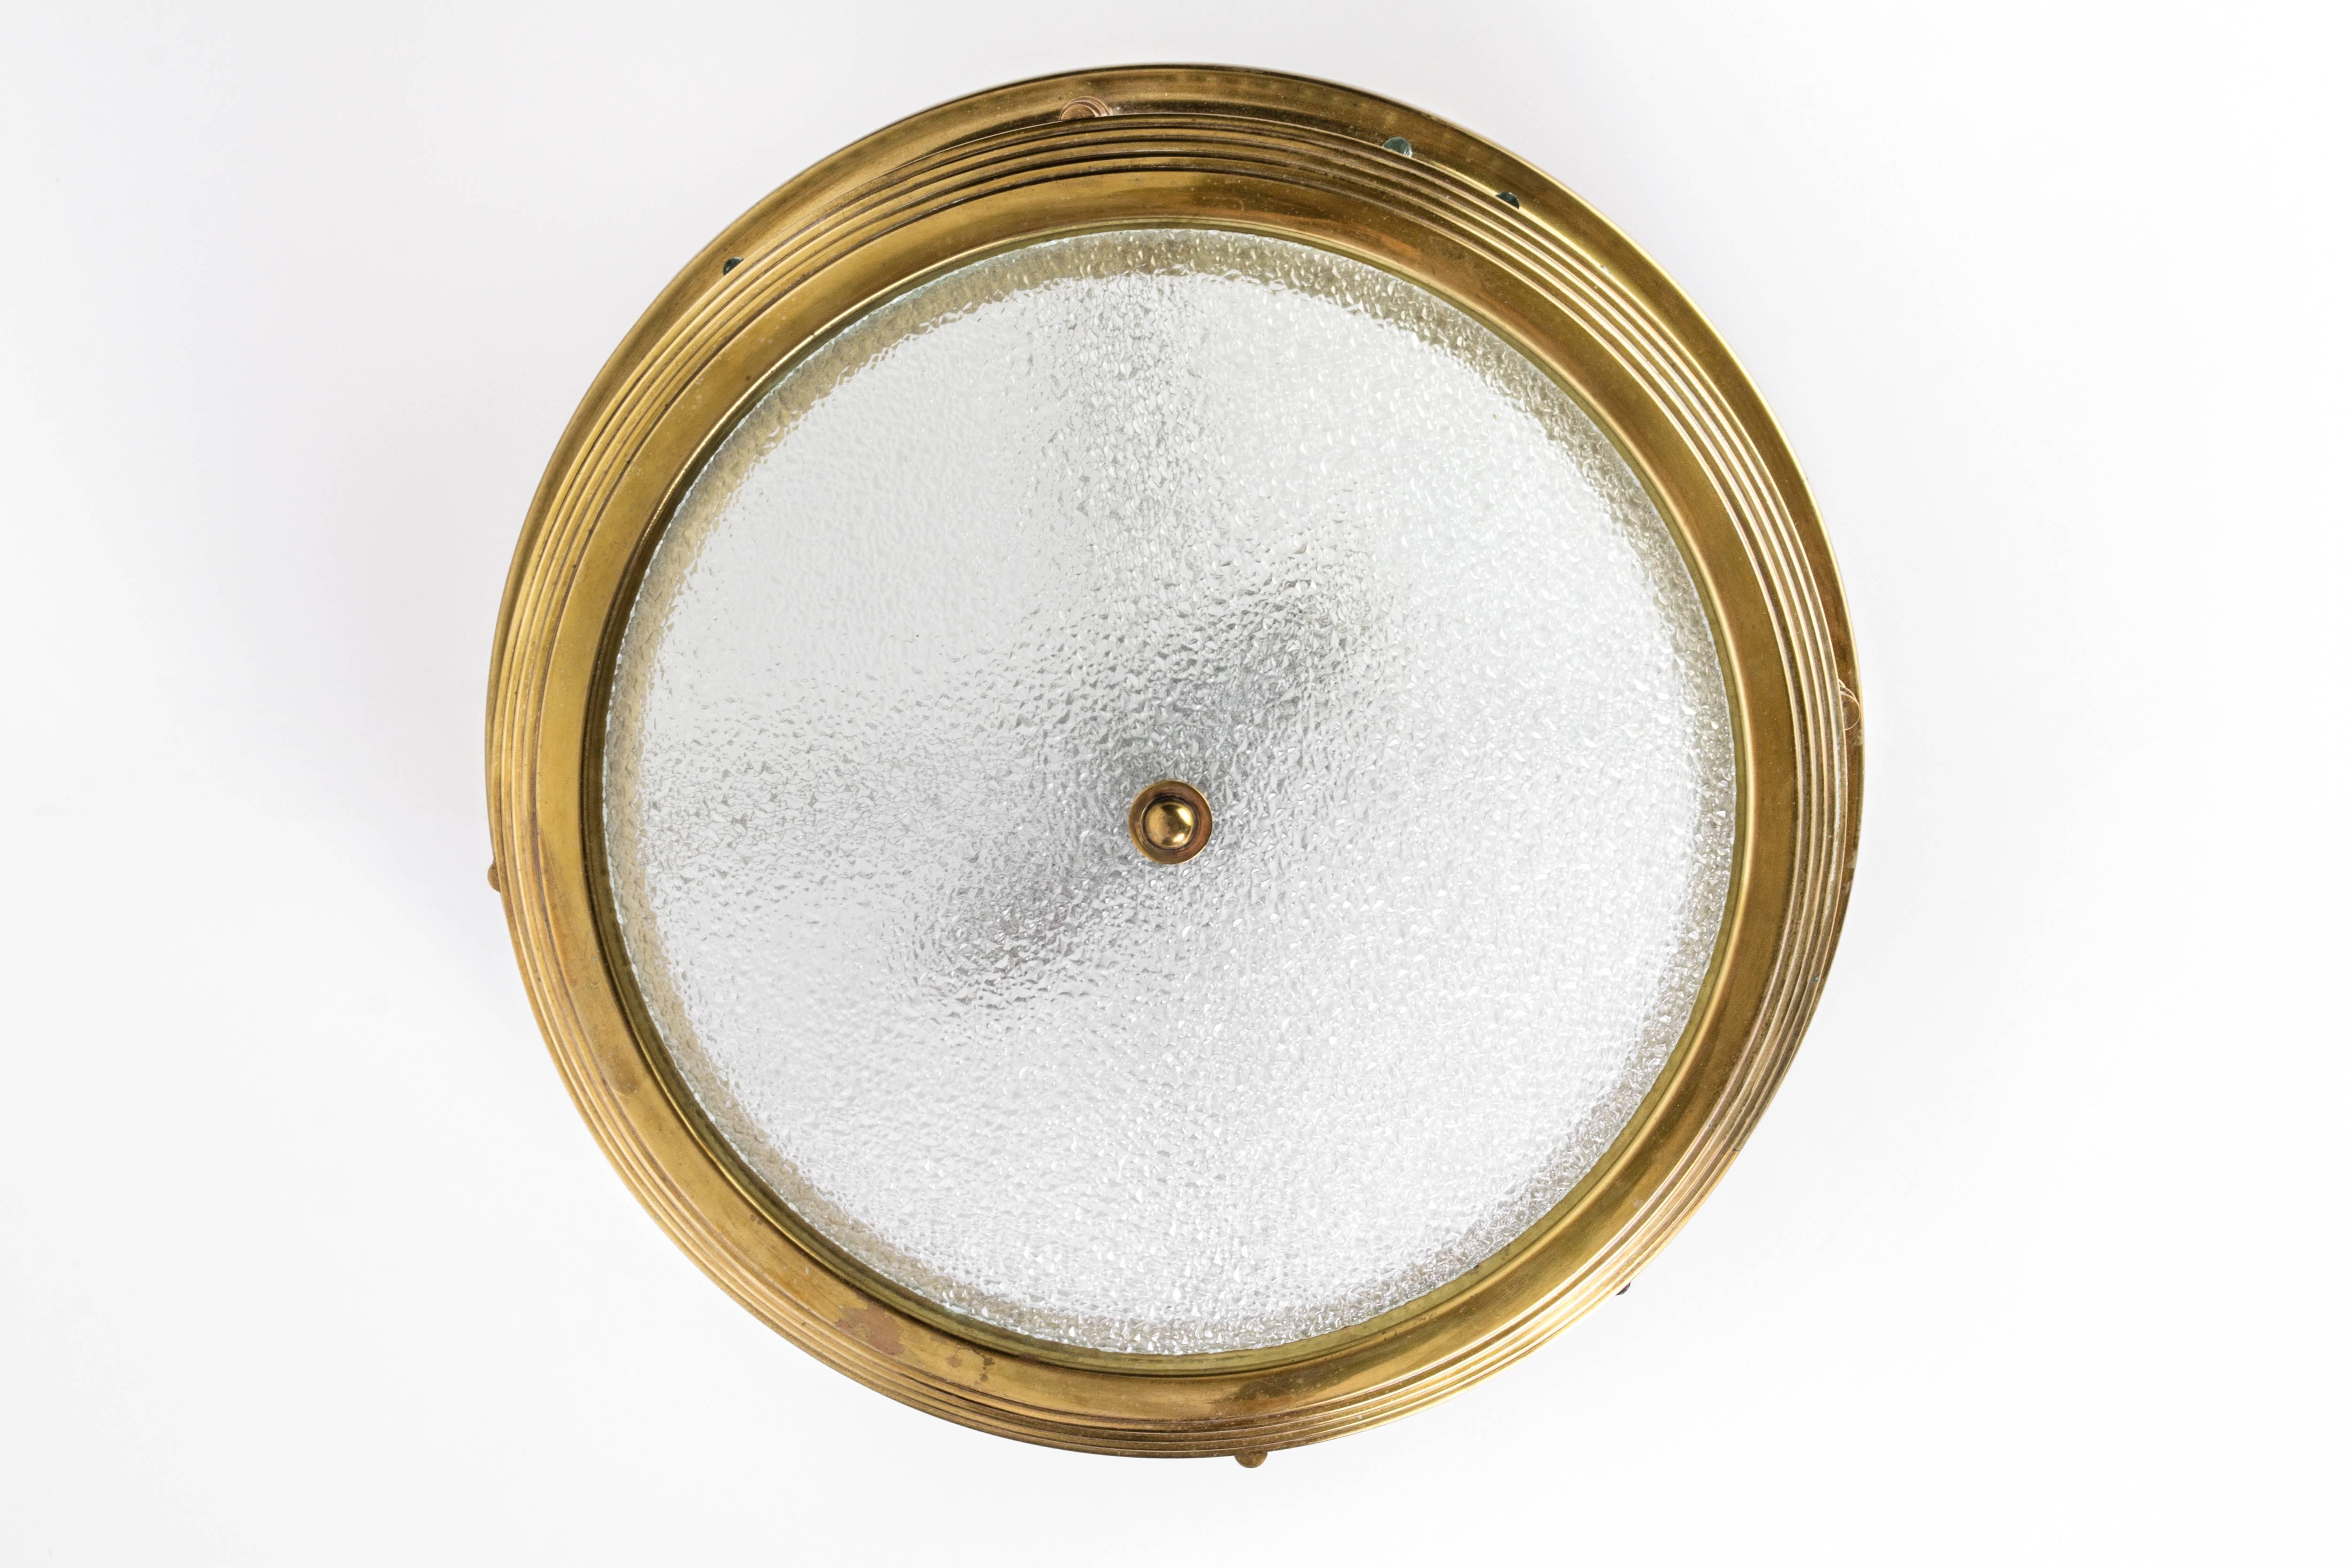 This exceptional 1940s French Art Deco flush mount is attributed to Jean Perzel. It features a solid brass circular form with sides in clear glass rods and plate in pebbled glass. It is in excellent condition.